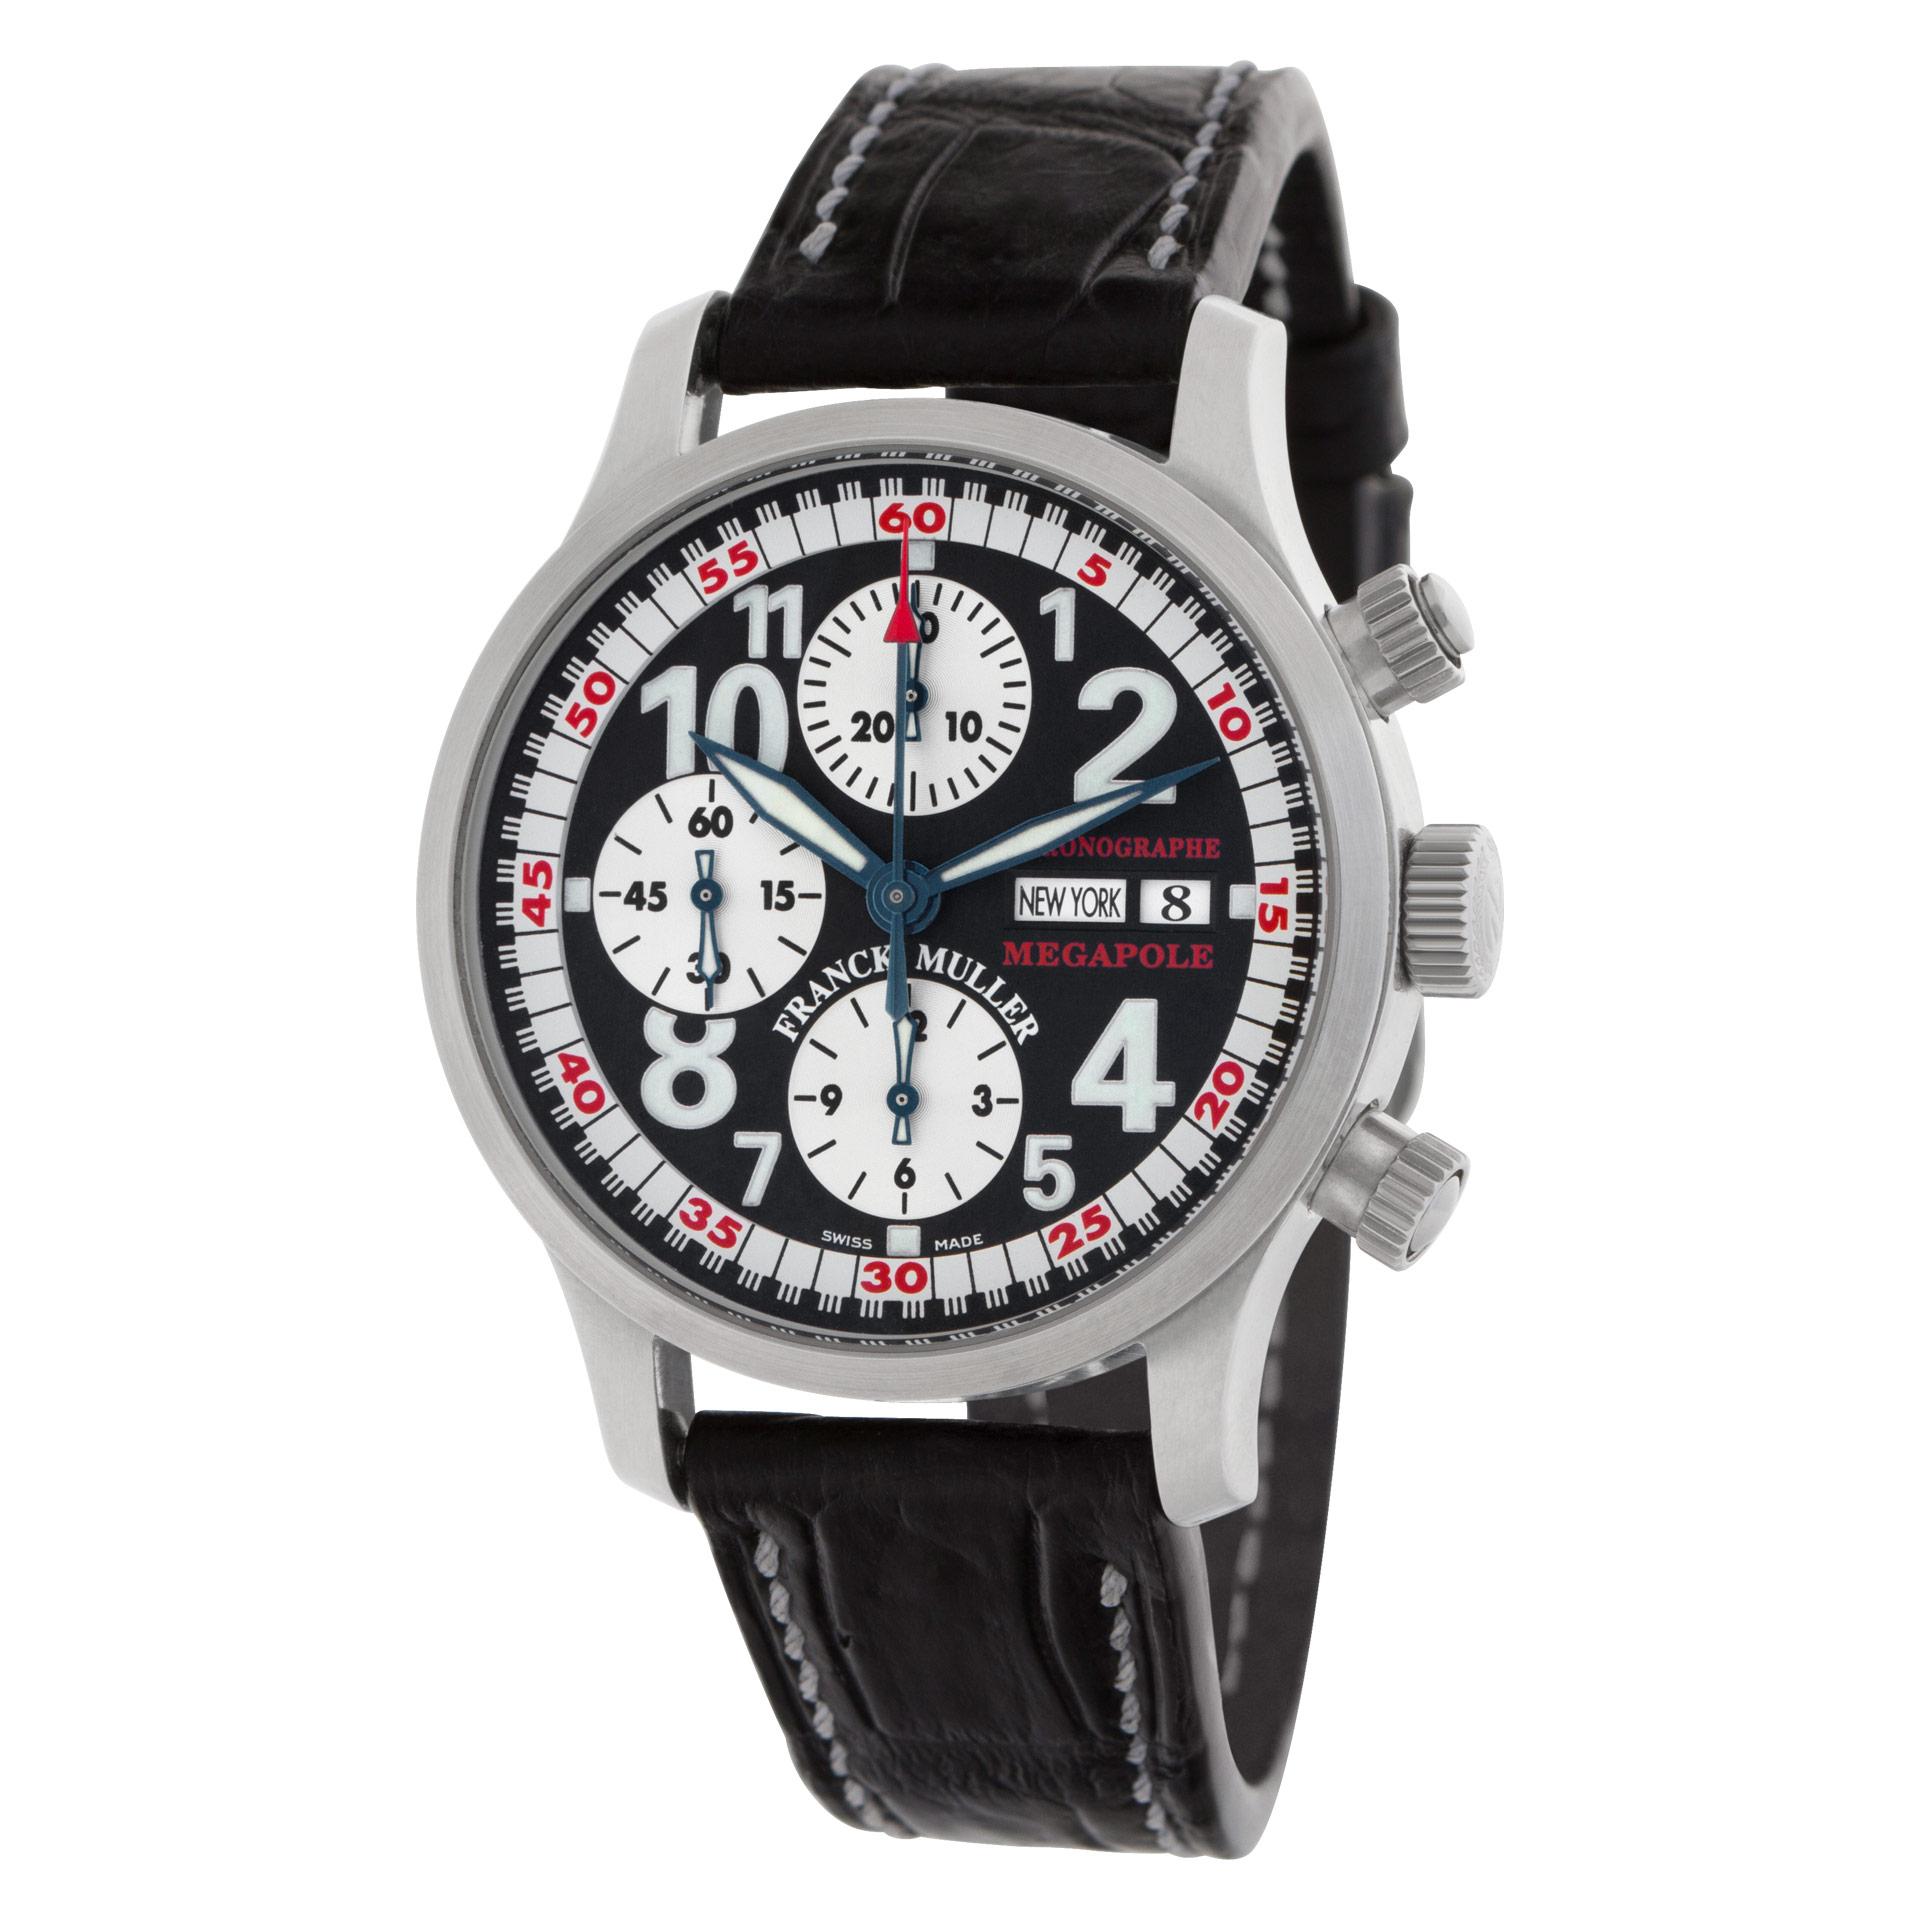 Franck Muller Transamerica Megapole in stainless steel on leather strap. Auto w/ subseconds, date, chronograph and world time. 40 mm case size. Circa 2010s. Fine Pre-owned Franck Muller Watch.  Certified preowned Sport Franck Muller Transamerica